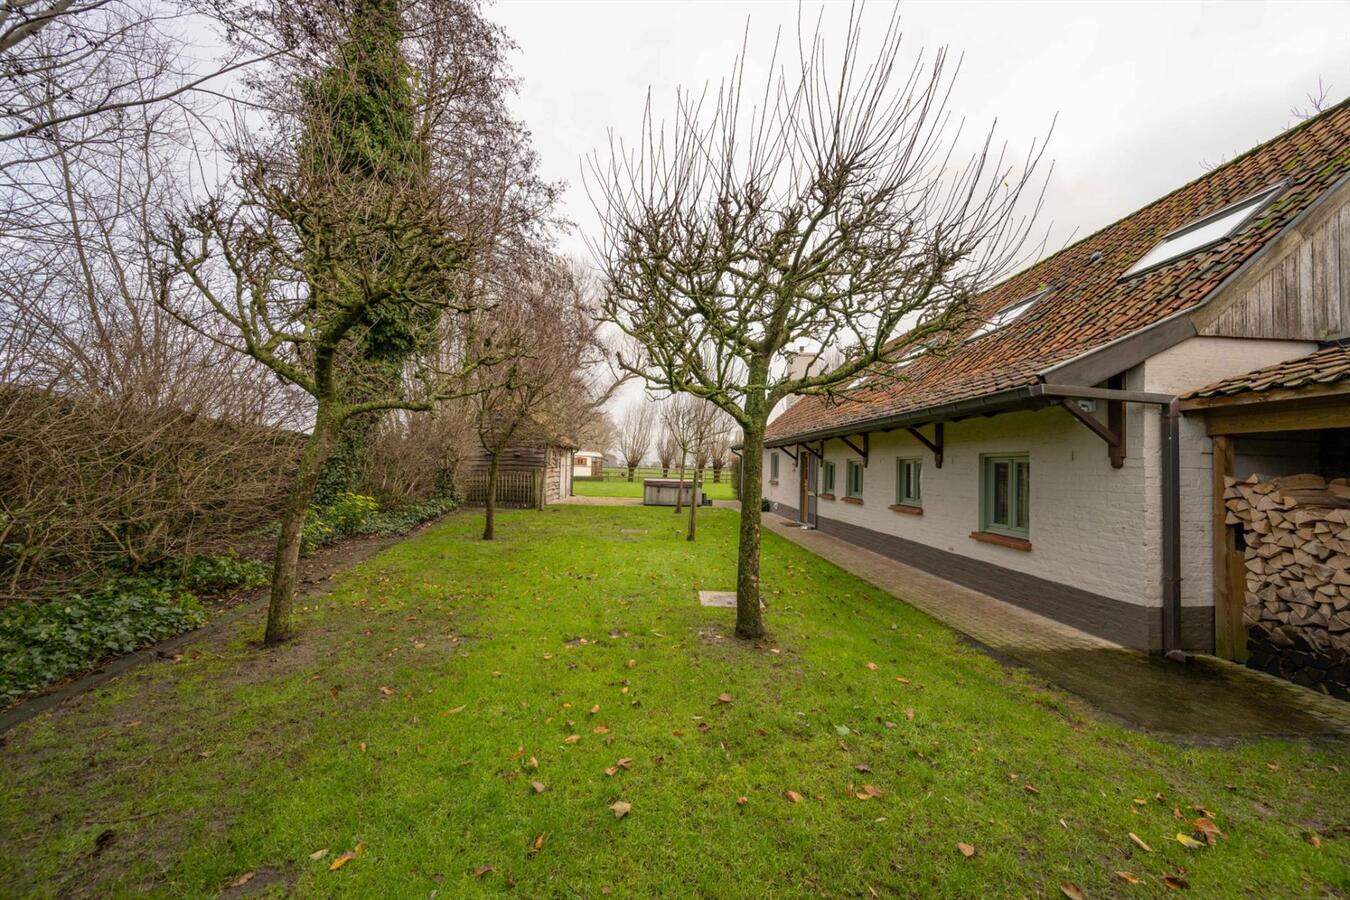 Country house sold in Ruiselede